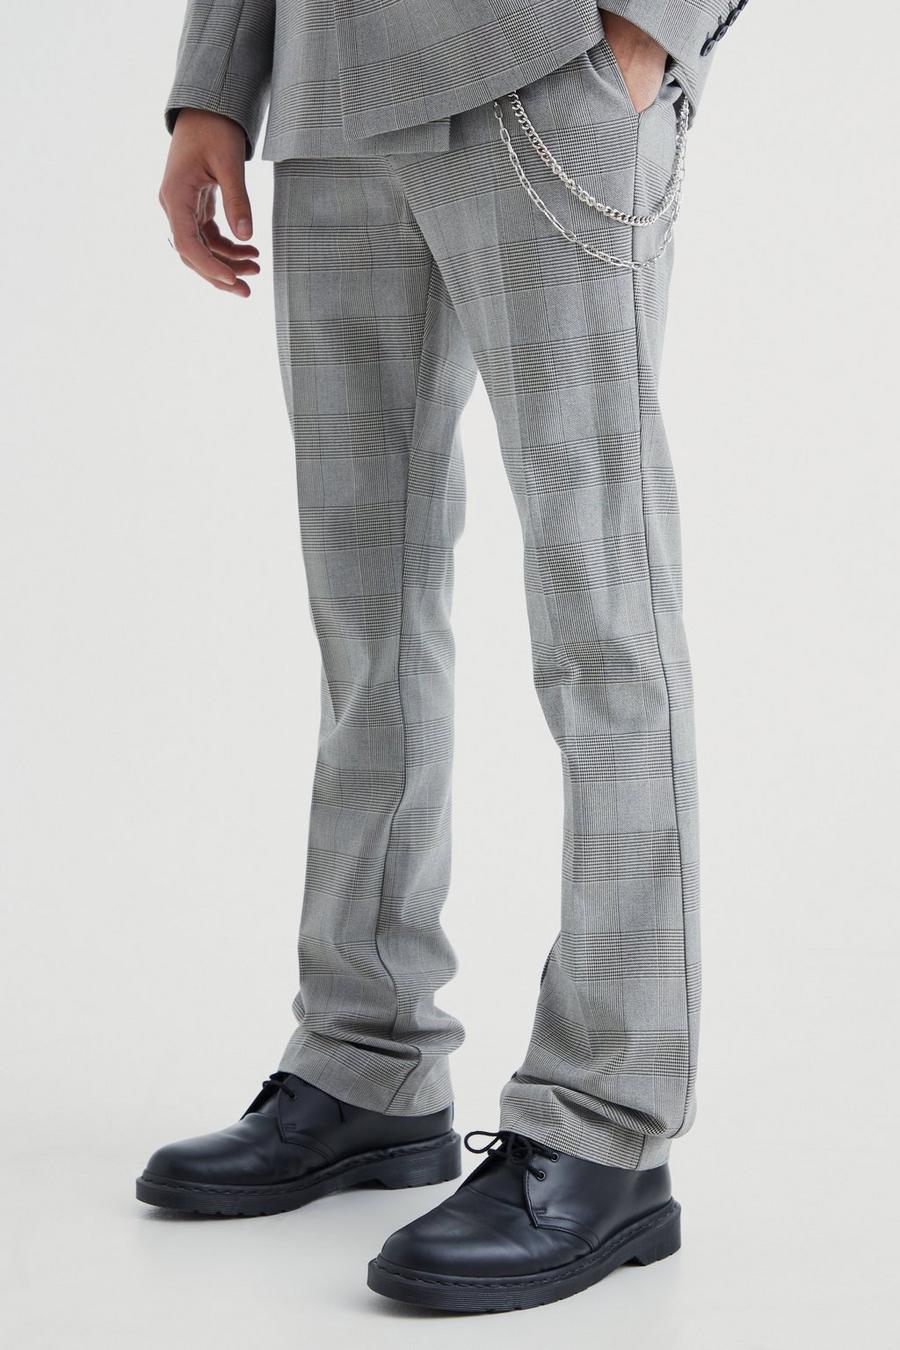 Grey Skinny Flare Pow Flannel Pants With Chain